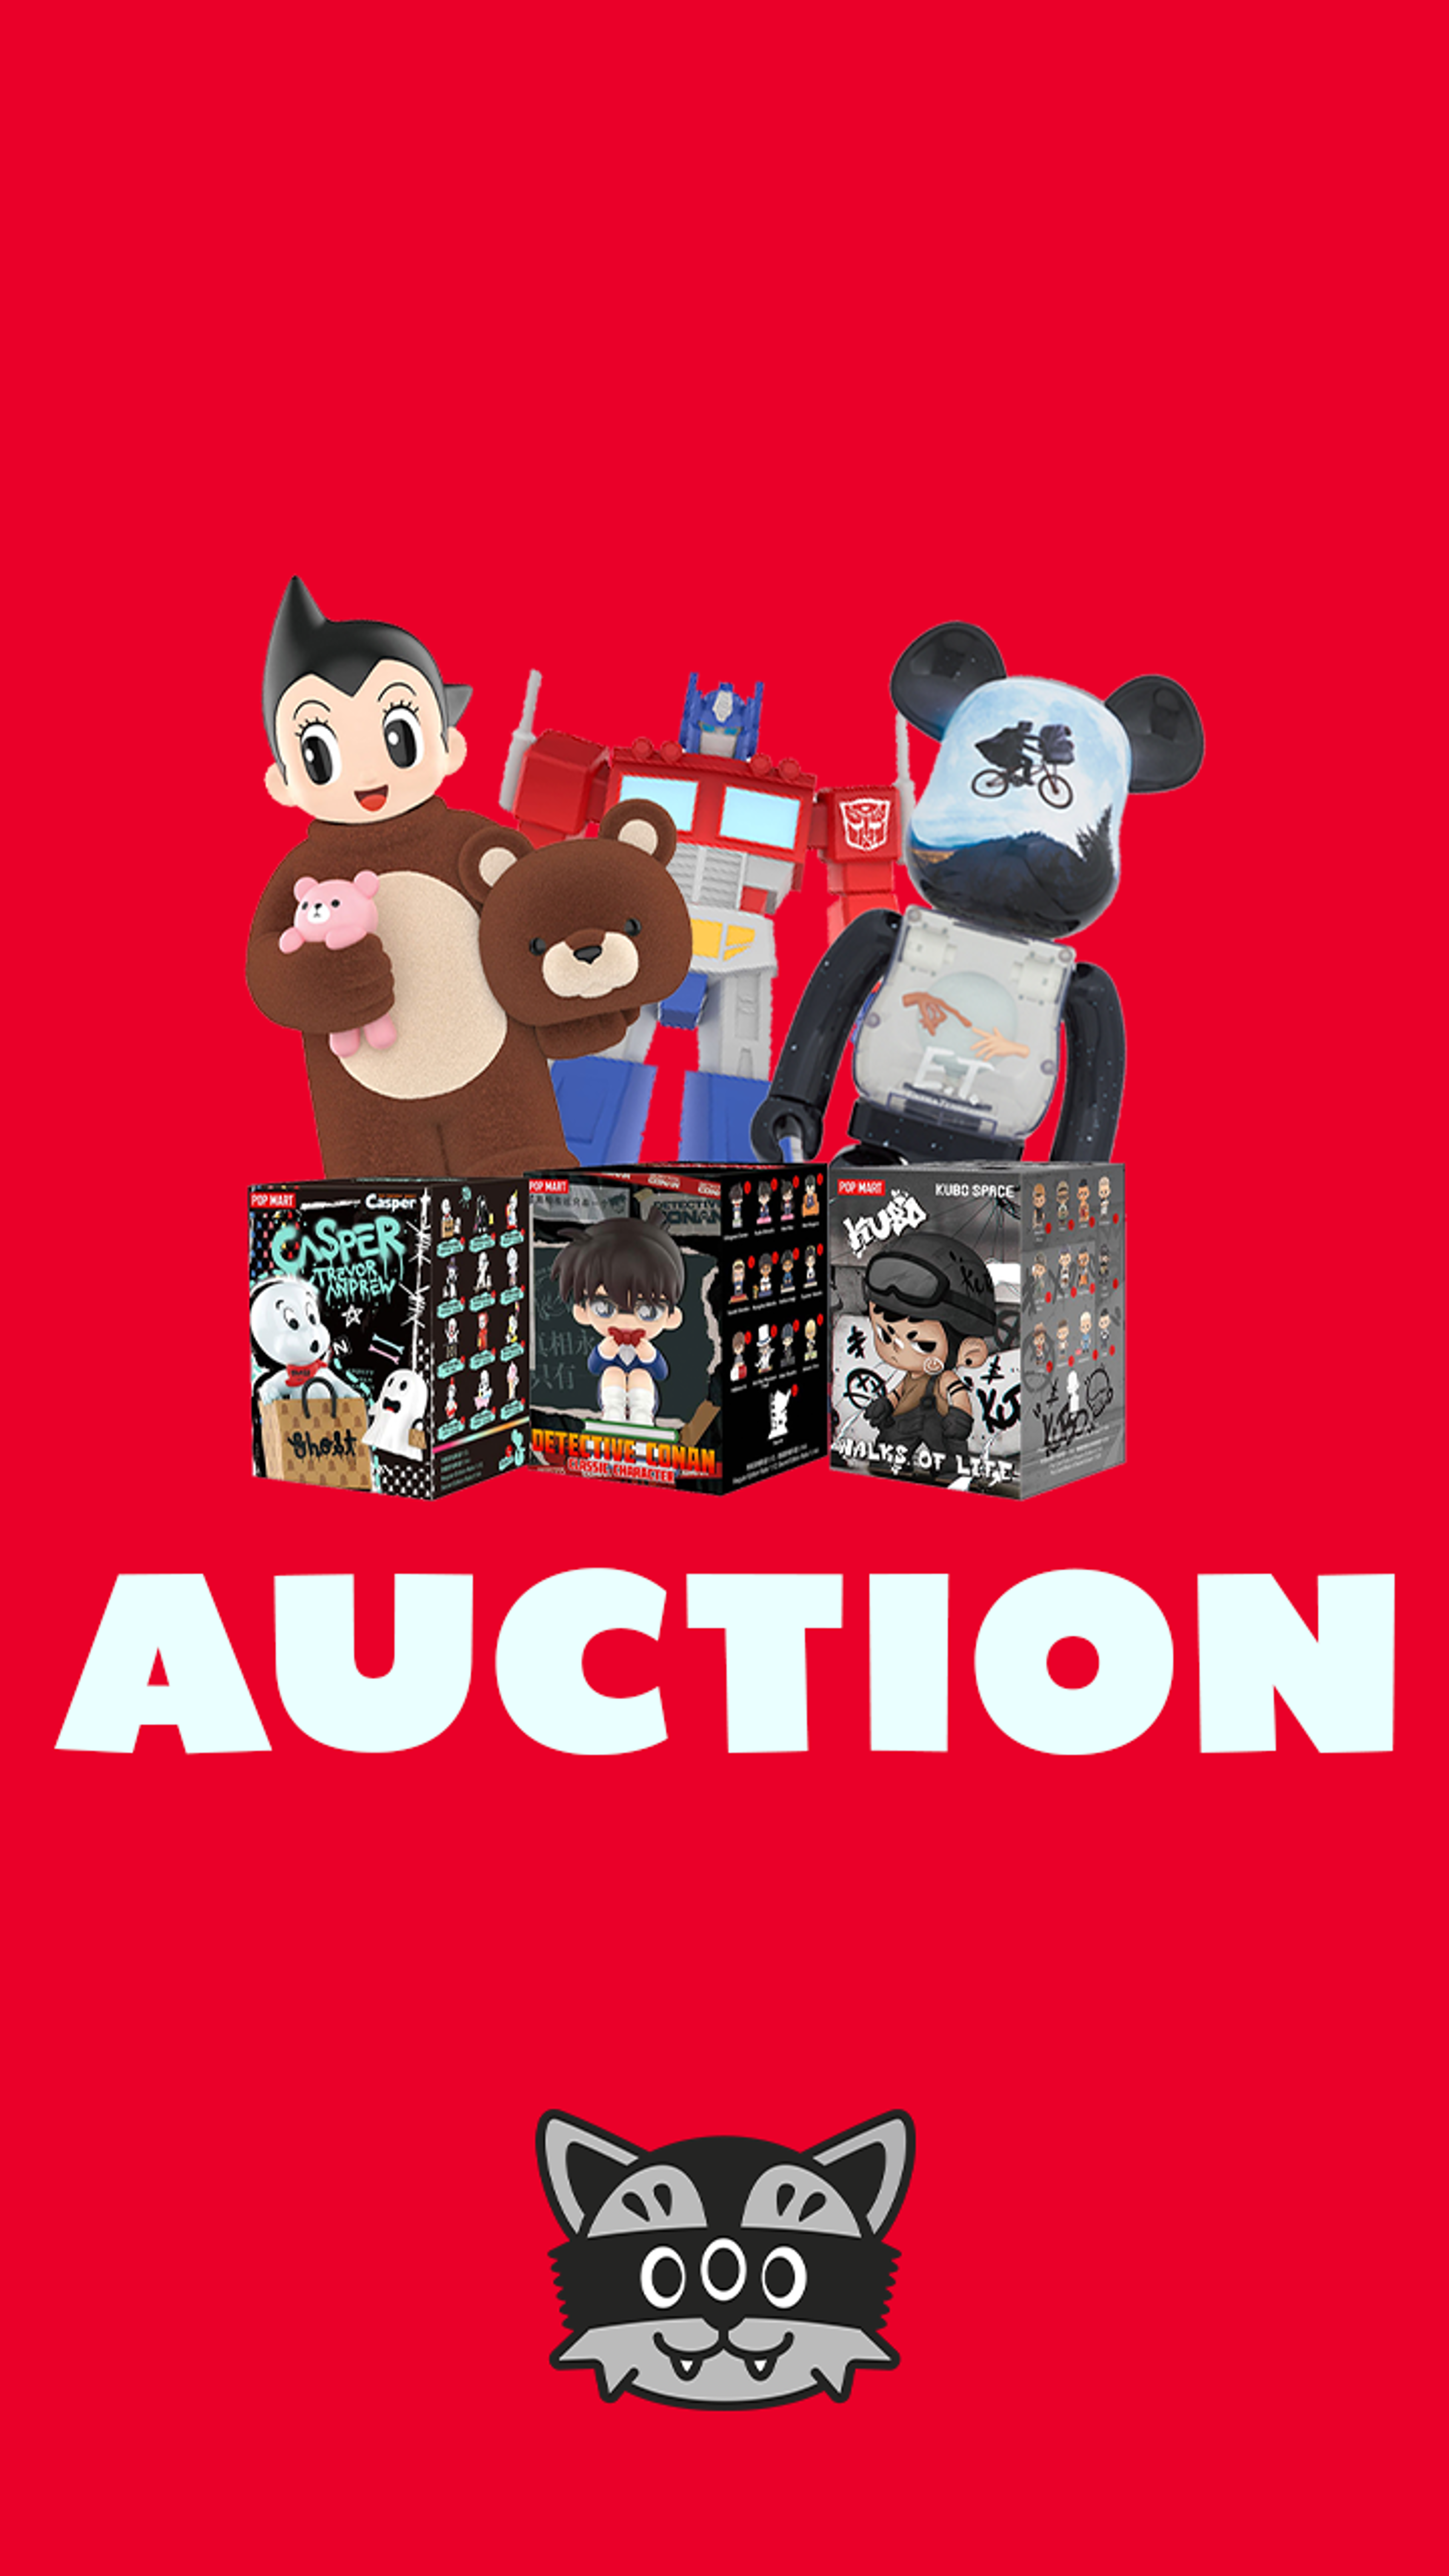 Preview image for the show titled "Mindzai Auction - April 26" at Today @ 5:00 PM